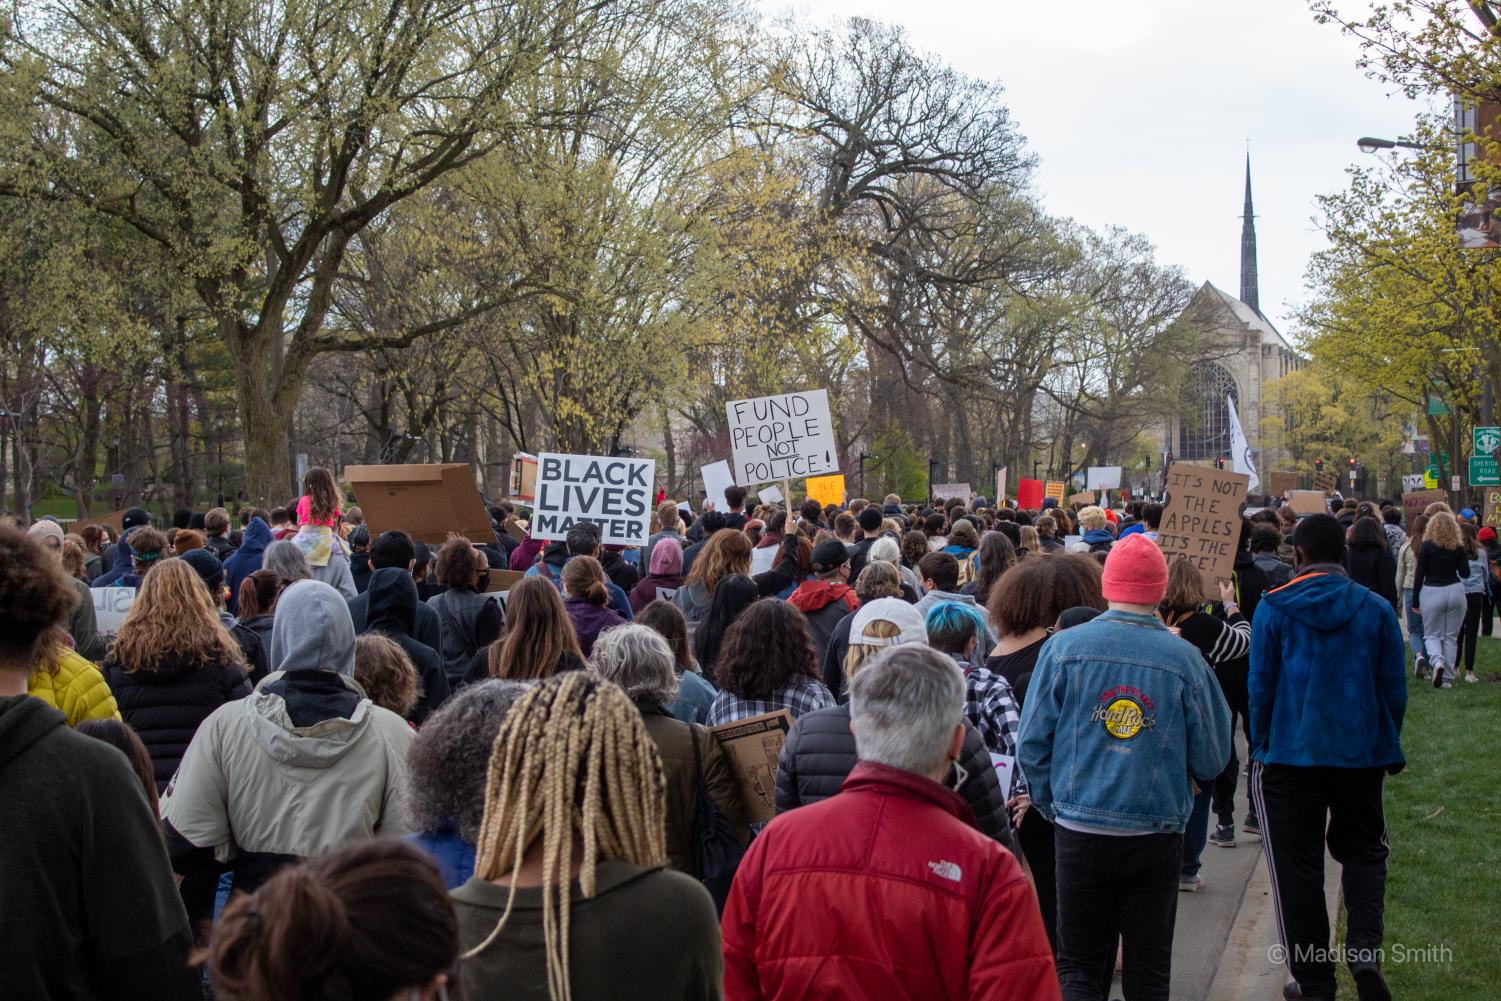 A+large+crowd+of+protesters+march+down+a+street+towards+a+church.+Some+hold+signs+with+the+words+%E2%80%9CBlack+Lives+Matter%2C%E2%80%9D+%E2%80%9CFund+people+not+police%E2%80%9D+and+%E2%80%9CIt%E2%80%99s+not+the+apples+it%E2%80%99s+the+tree.%E2%80%9D